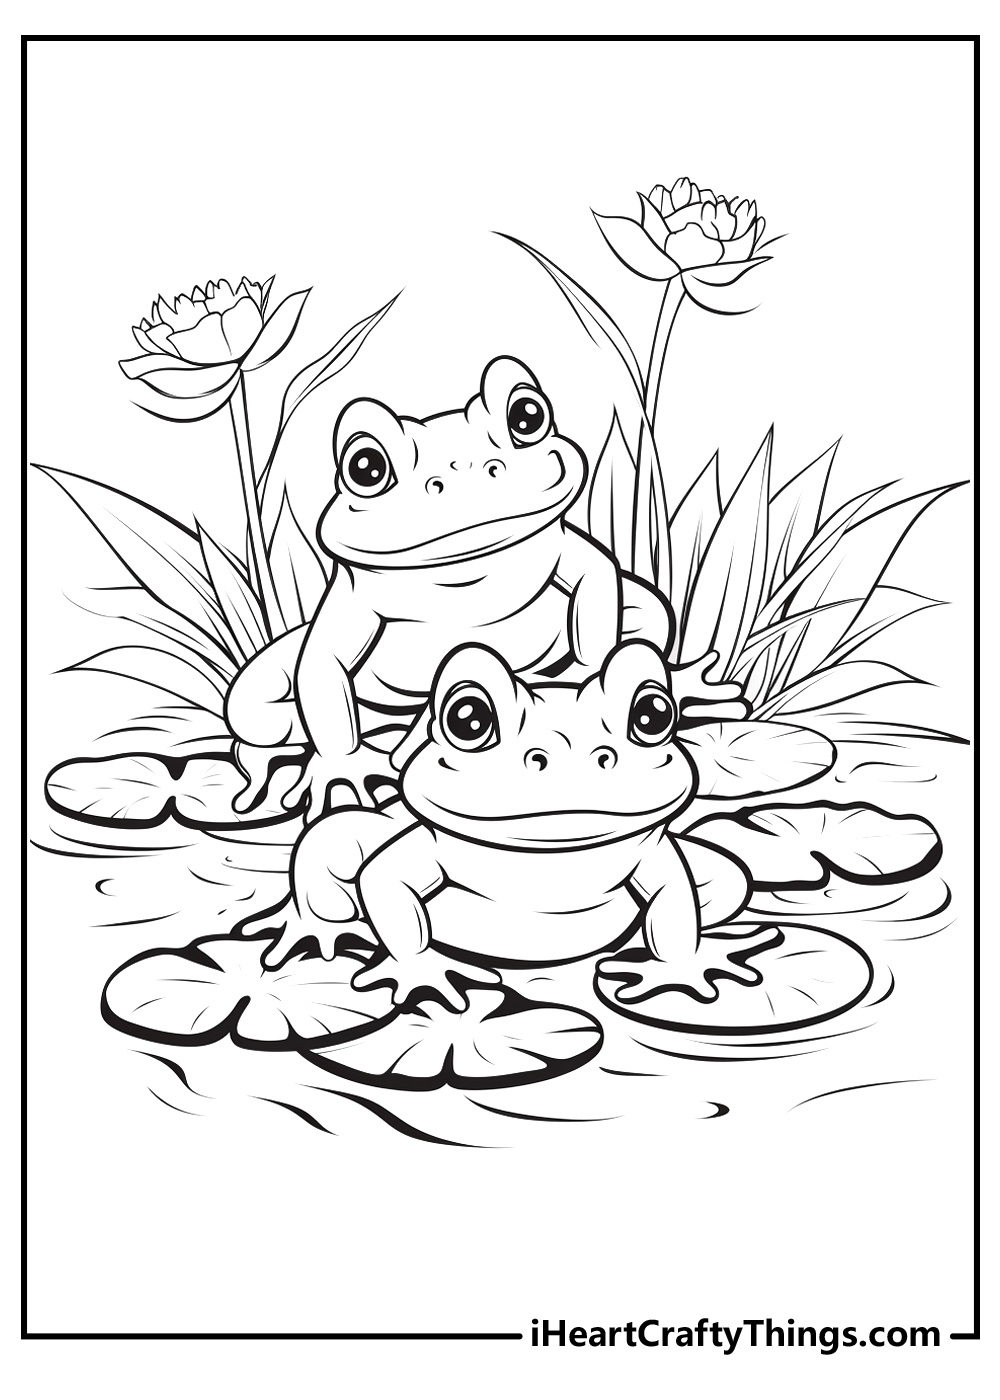 black-and-white frog coloring printable